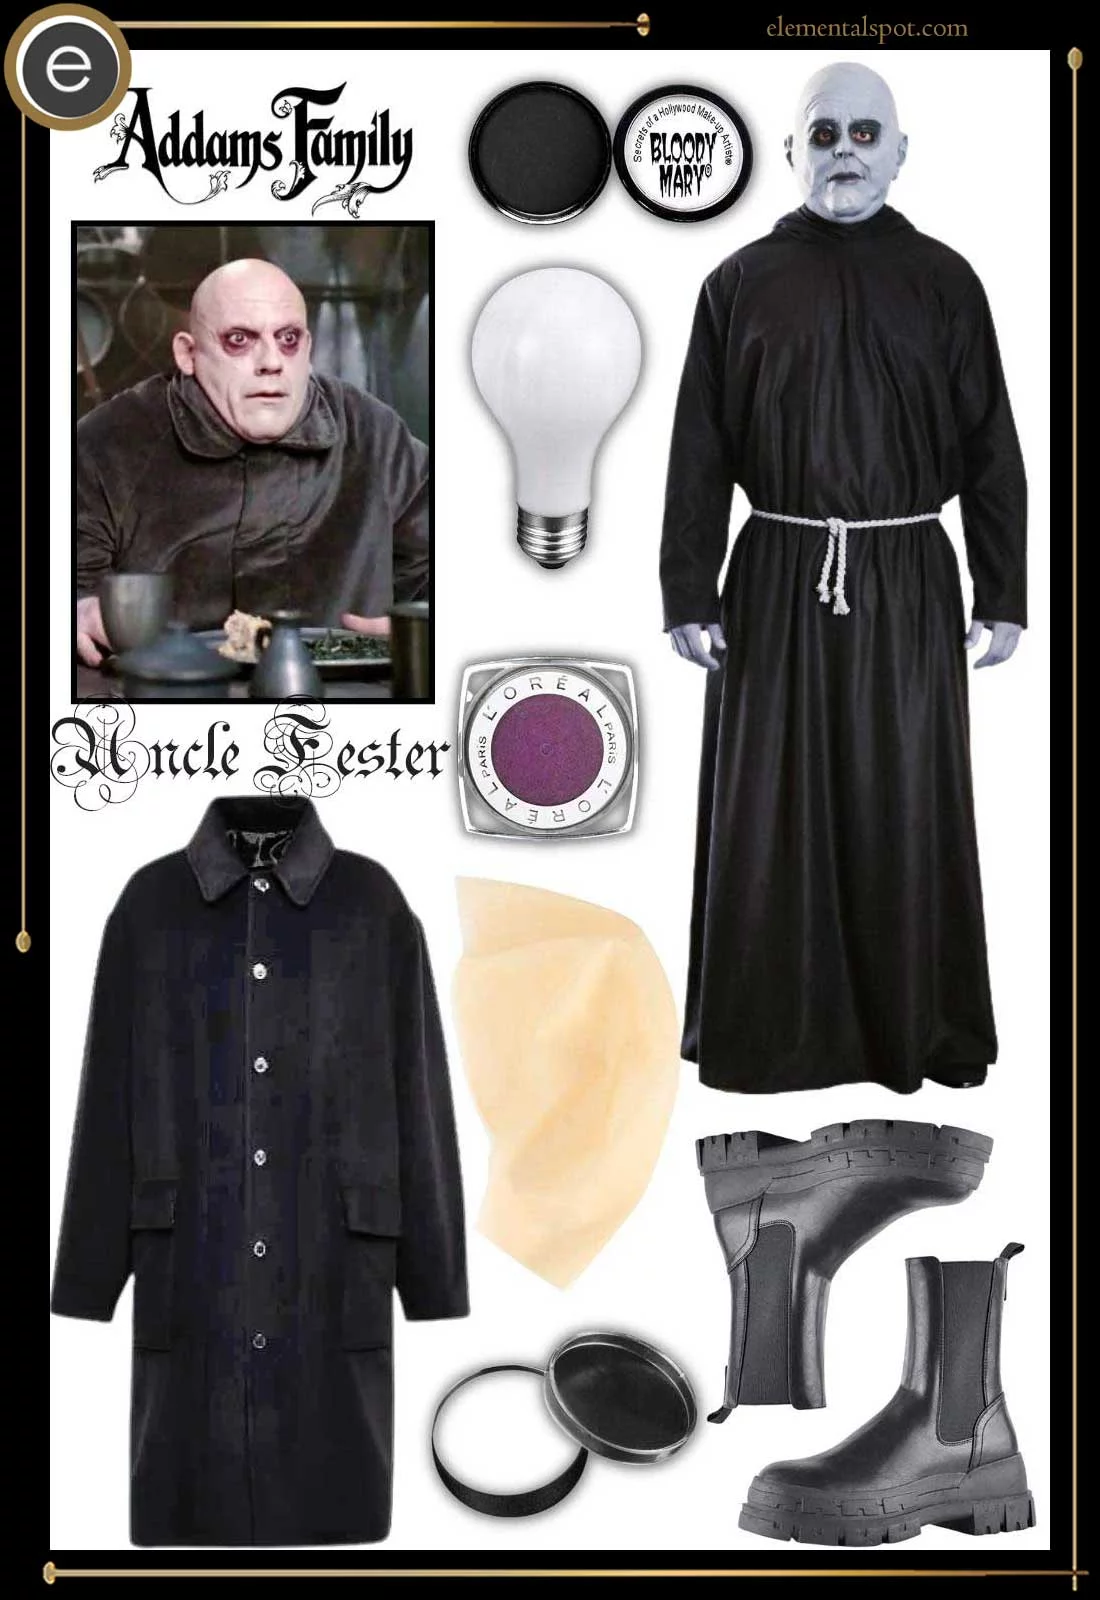 Dress Up Like Uncle Fester from Addams Family - Elemental Spot